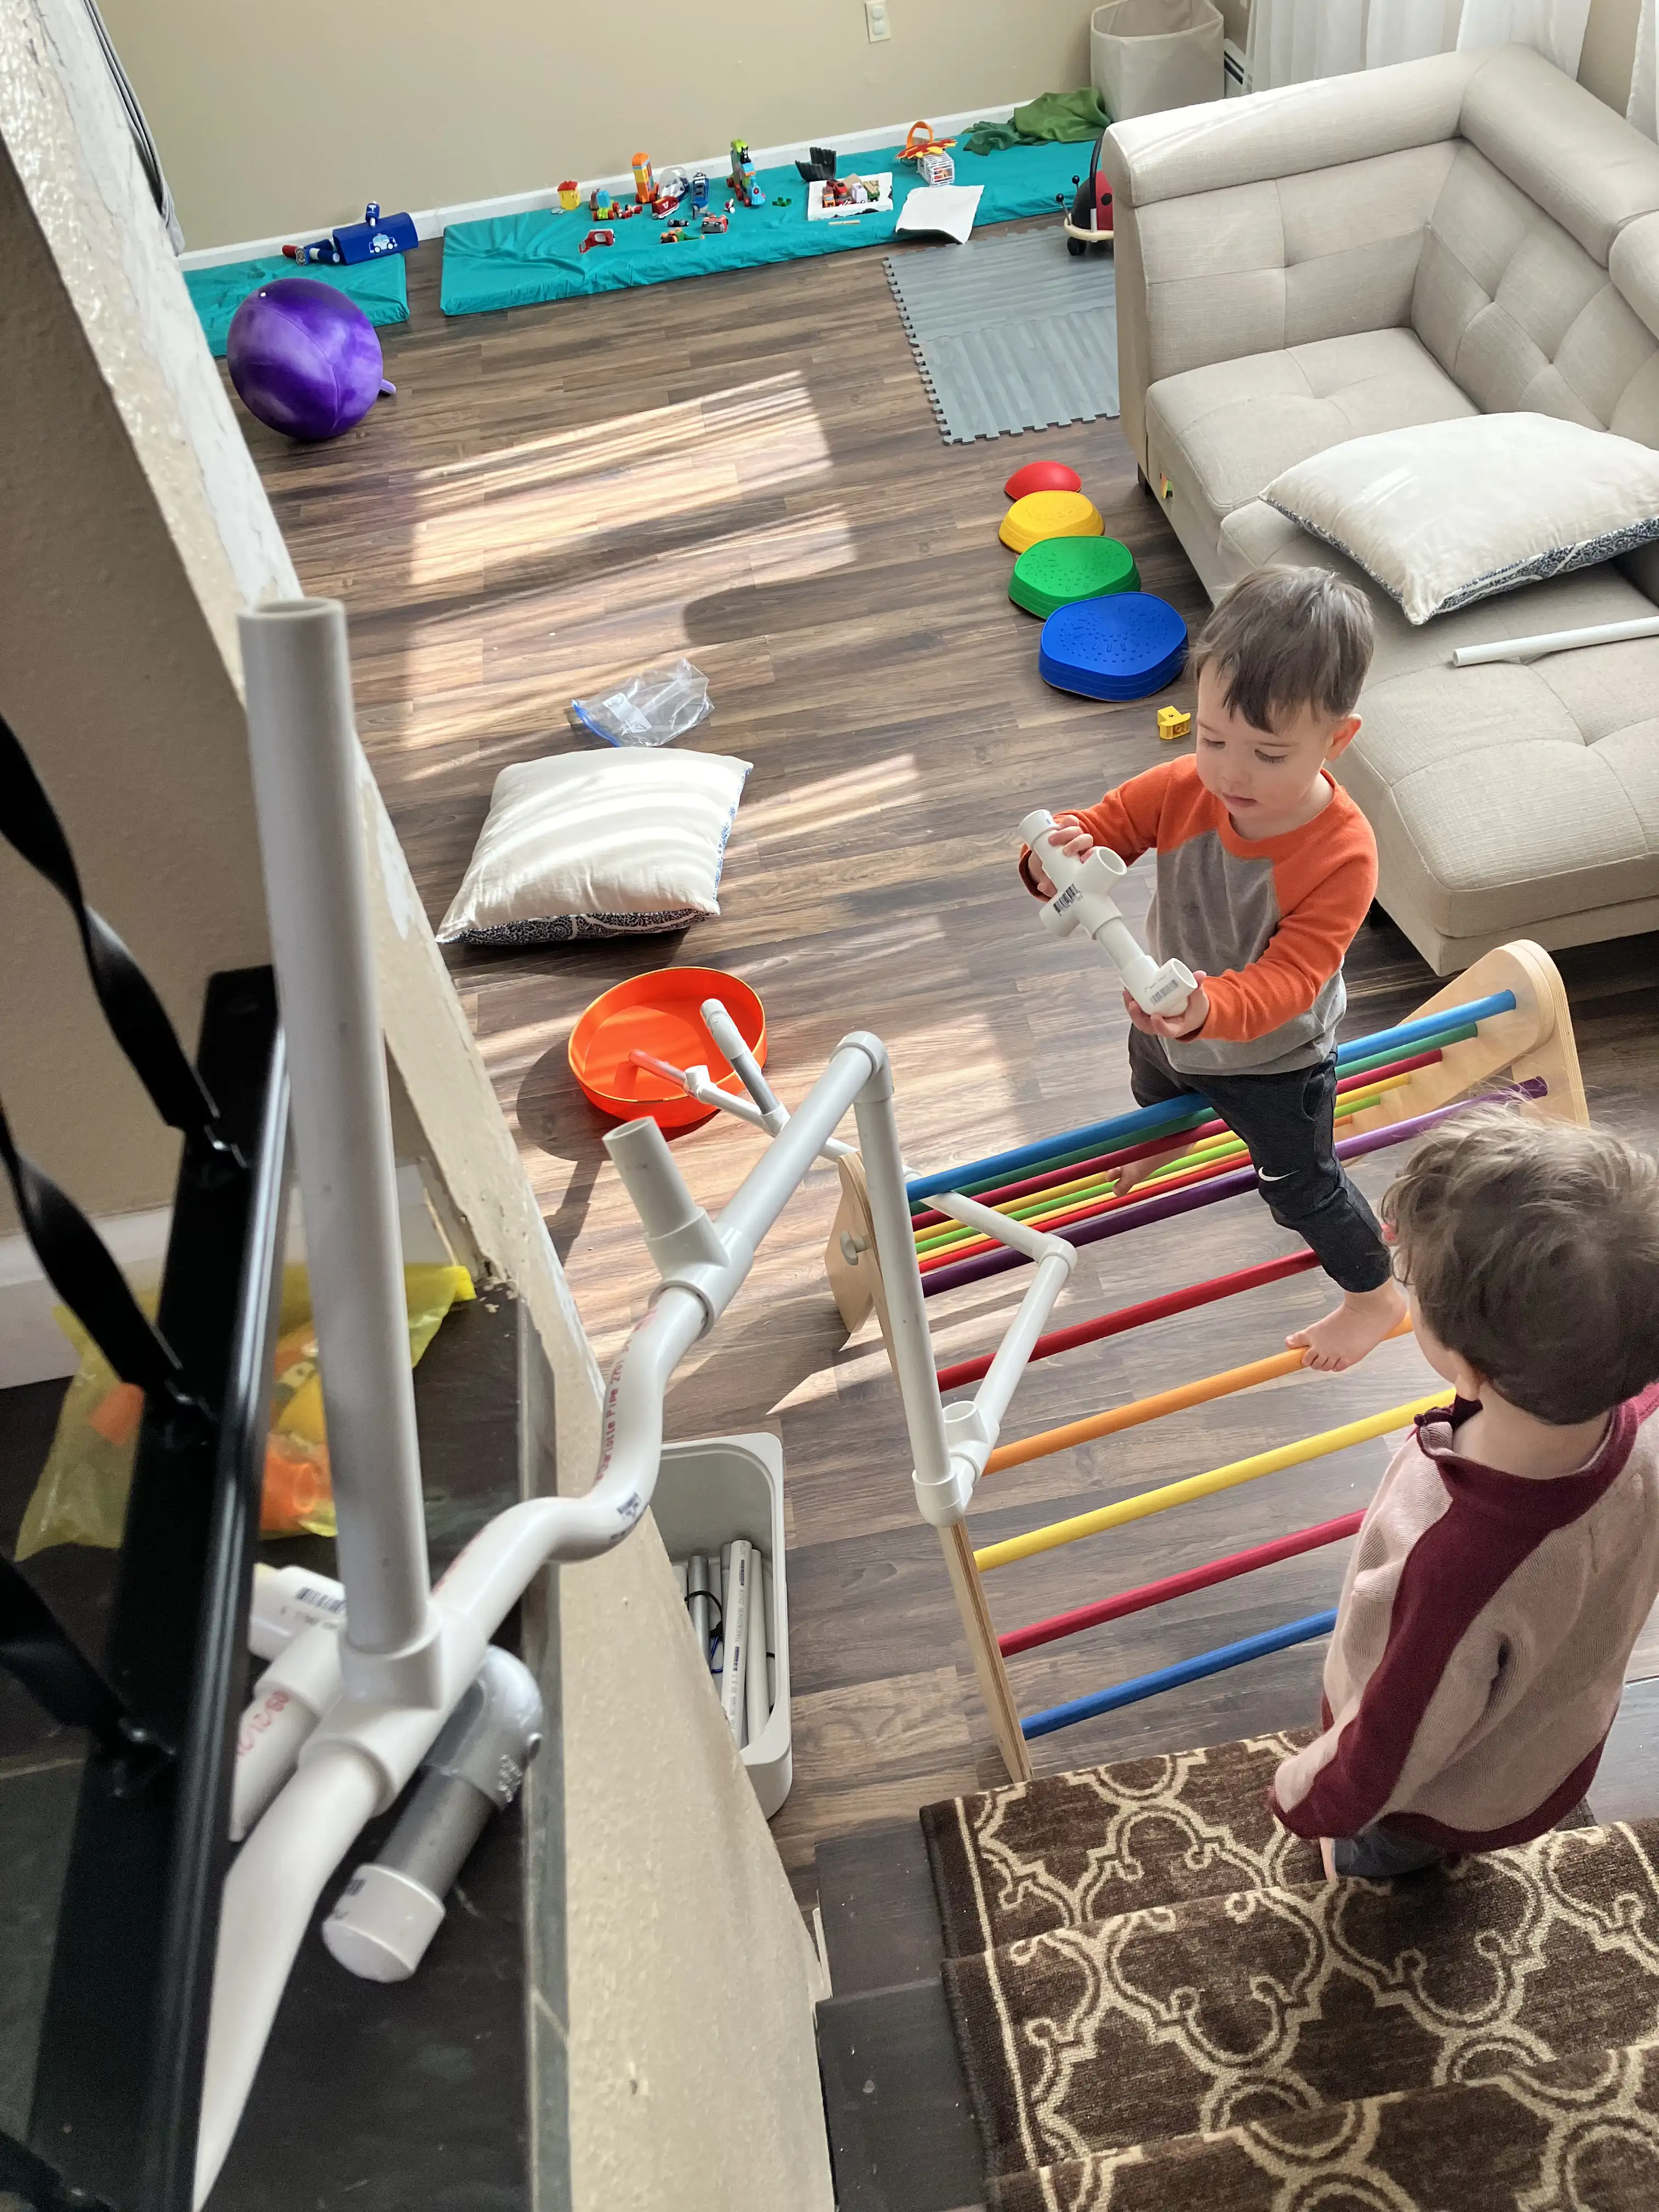 Graham and Royal downstairs with the marble run of PVC pipe running down the stairs. Royal stands on a climbing post holding PVC pipe.